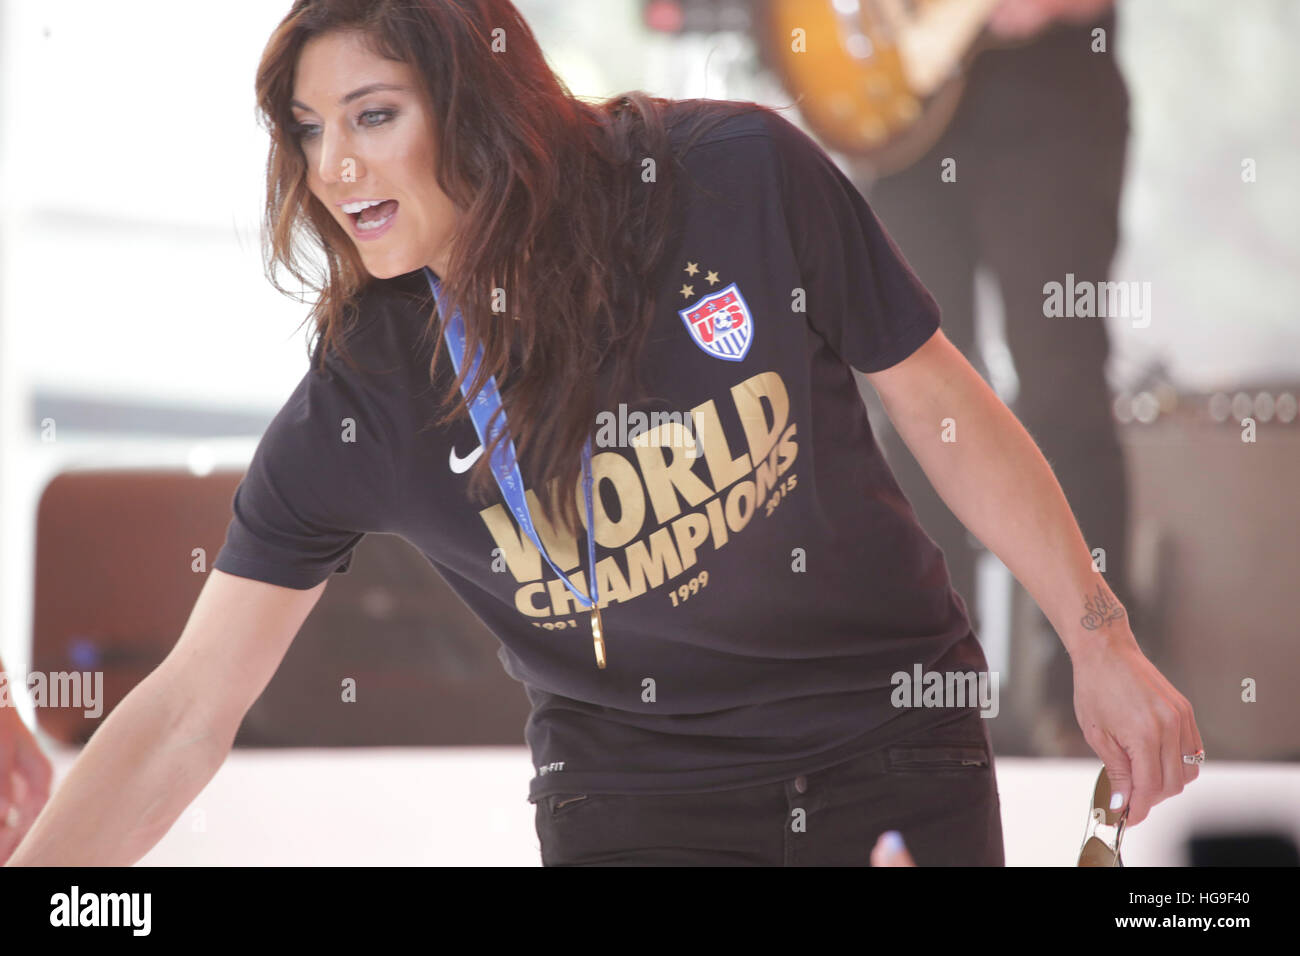 Pics hope solo Upon seeing